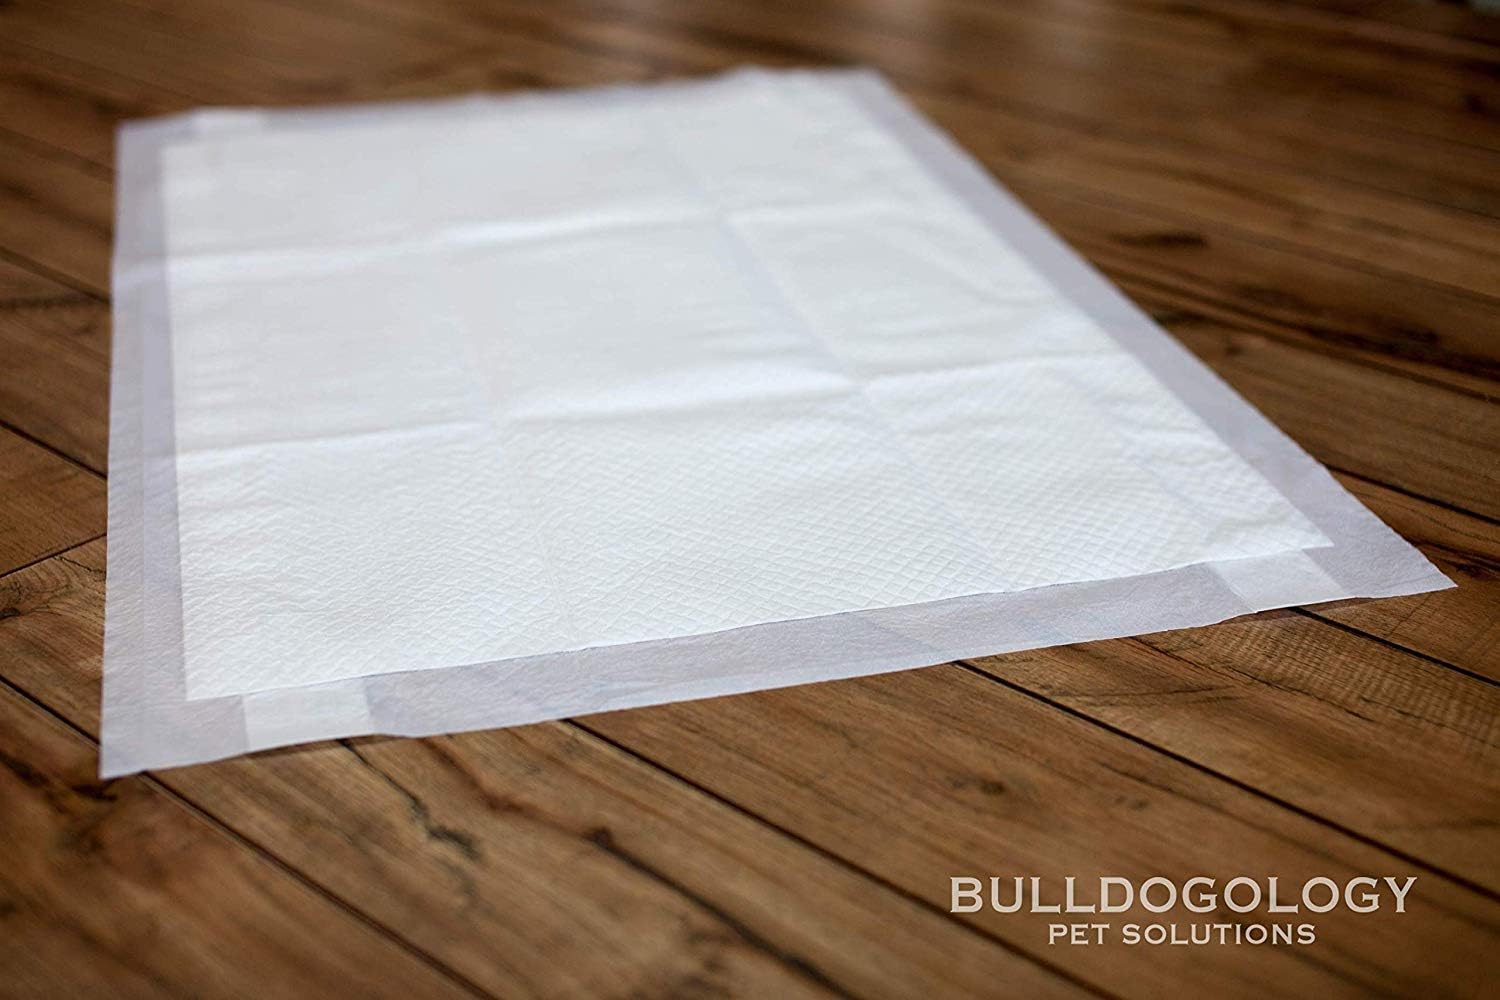 Bulldogology Pet Solutions Bulldogology Premium Puppy Pee Pads with Adhesive Sticky Tape (24x35) X-Large Dog Training Pads (60-Count, White)